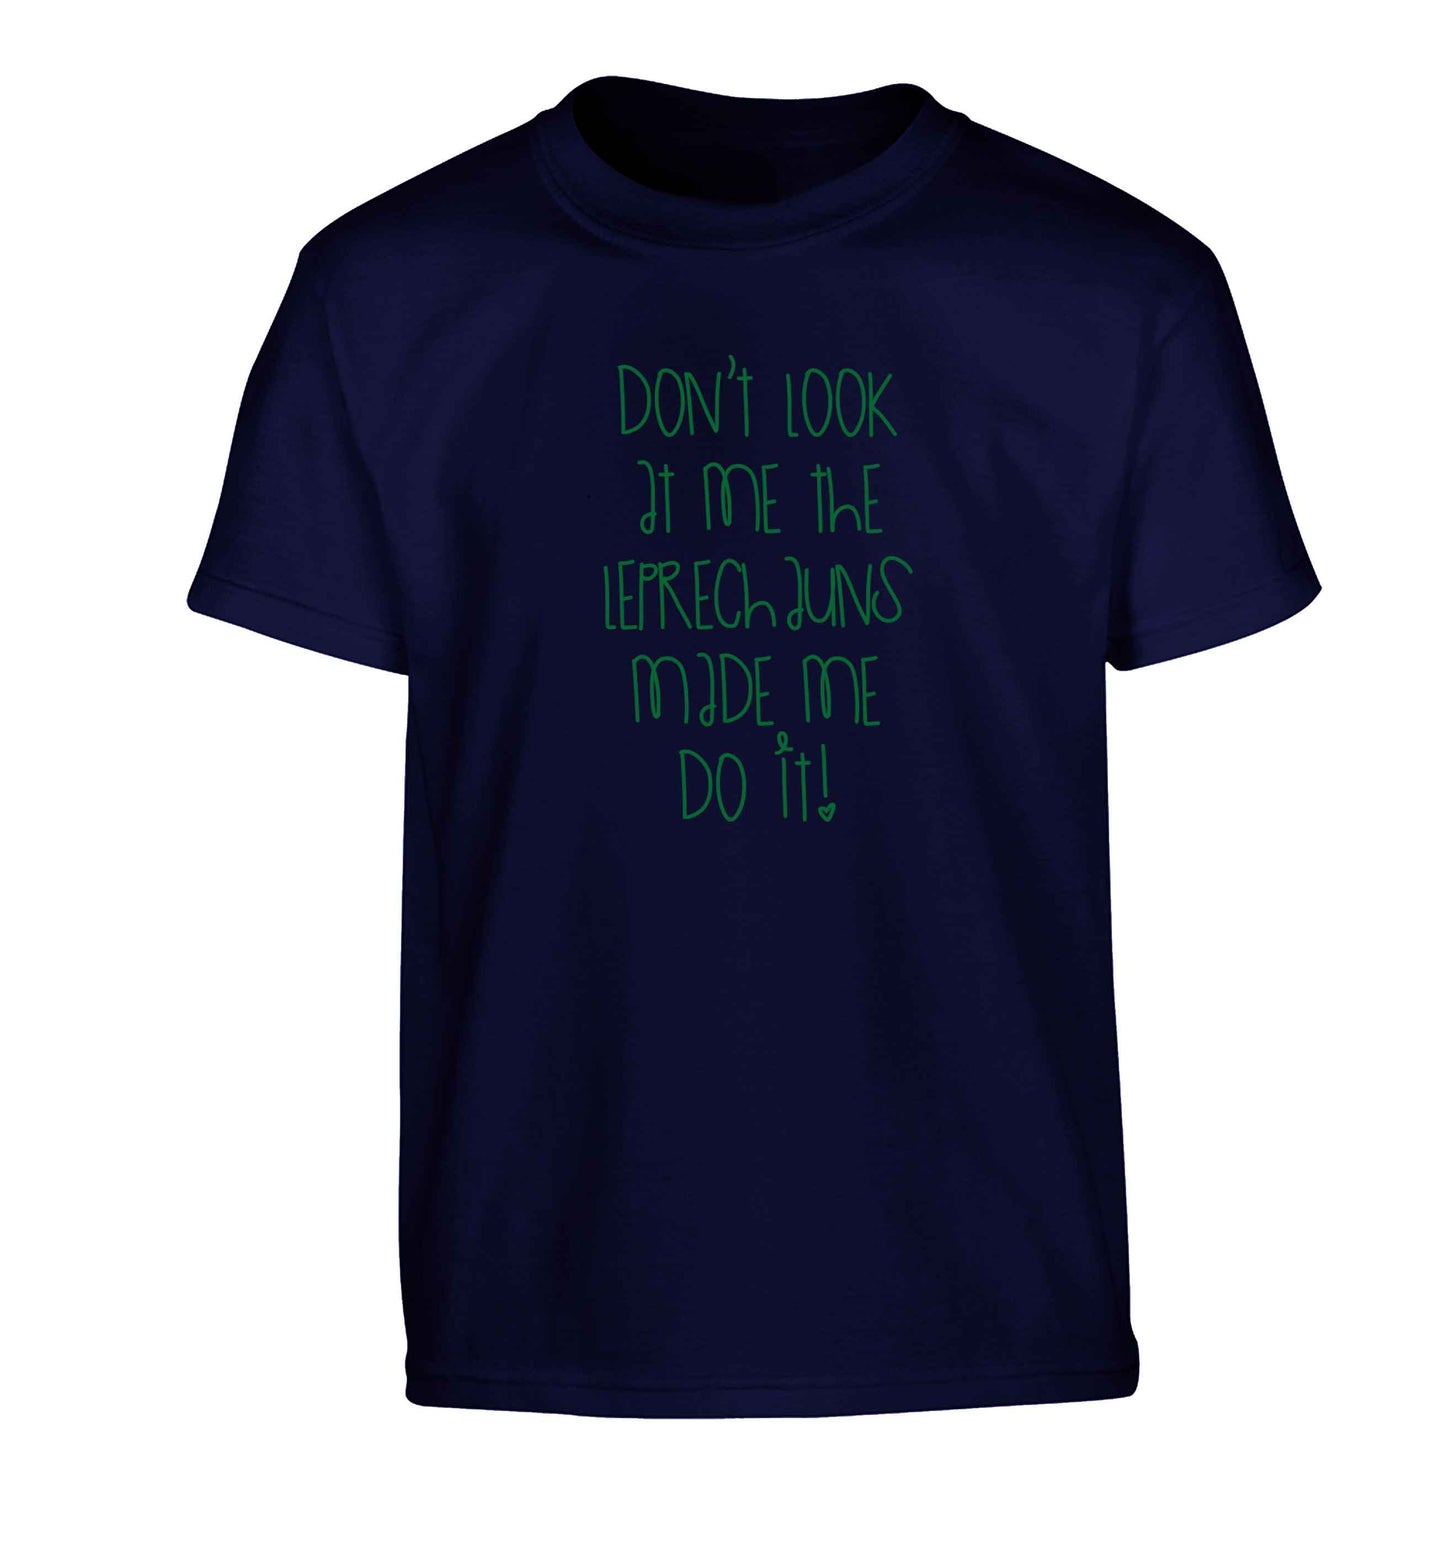 Don't look at me the leprechauns made me do it Children's navy Tshirt 12-13 Years